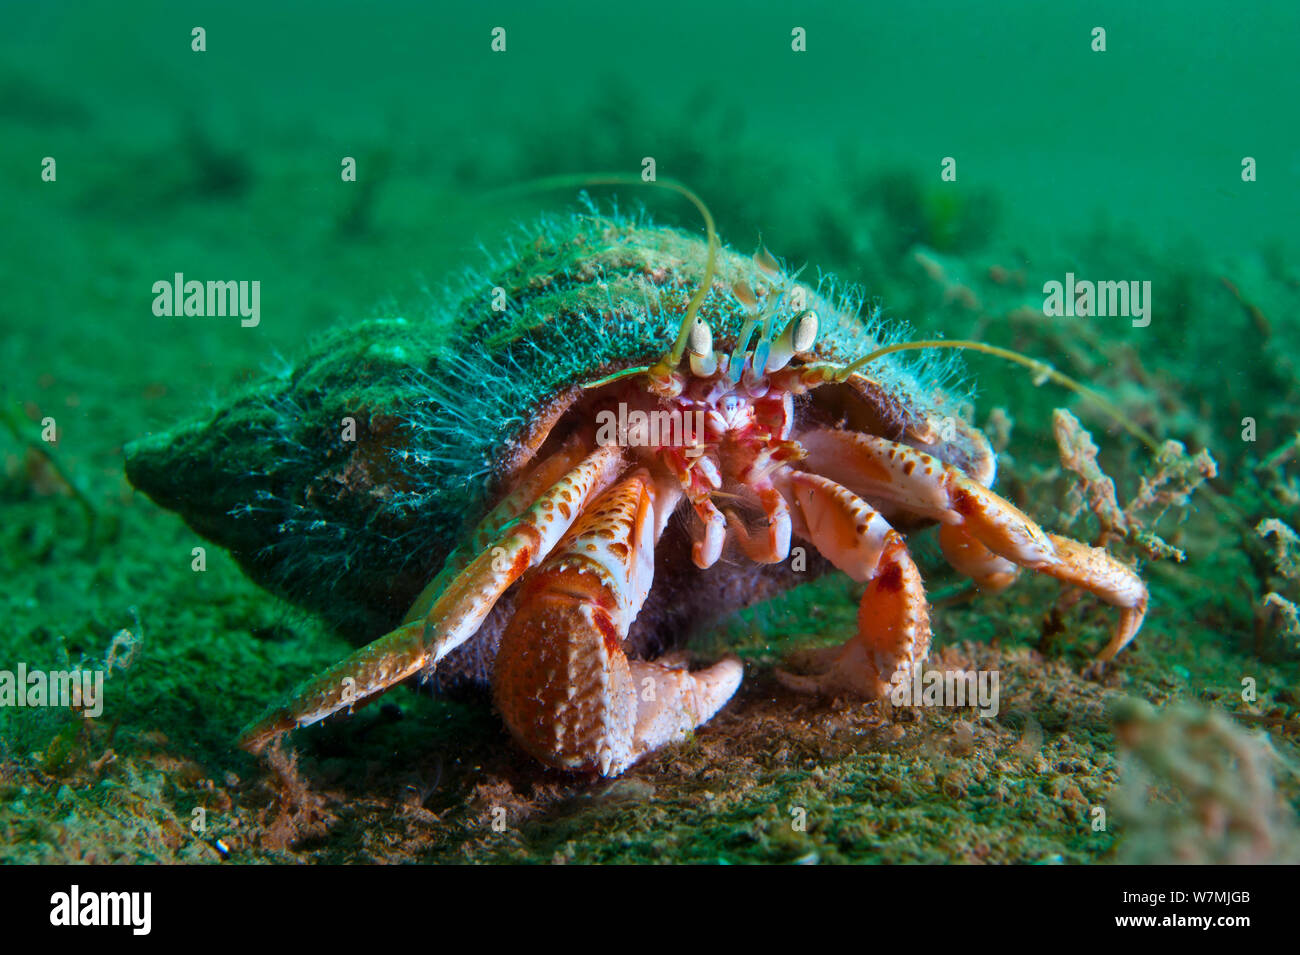 Common hermit crab (Pagurus bernhardus) in mollusc shell covered with the hydroid (Hydractinia echinata), which lives only on the shells of hermit crabs. Loch Long, Scotland, UK, May Stock Photo